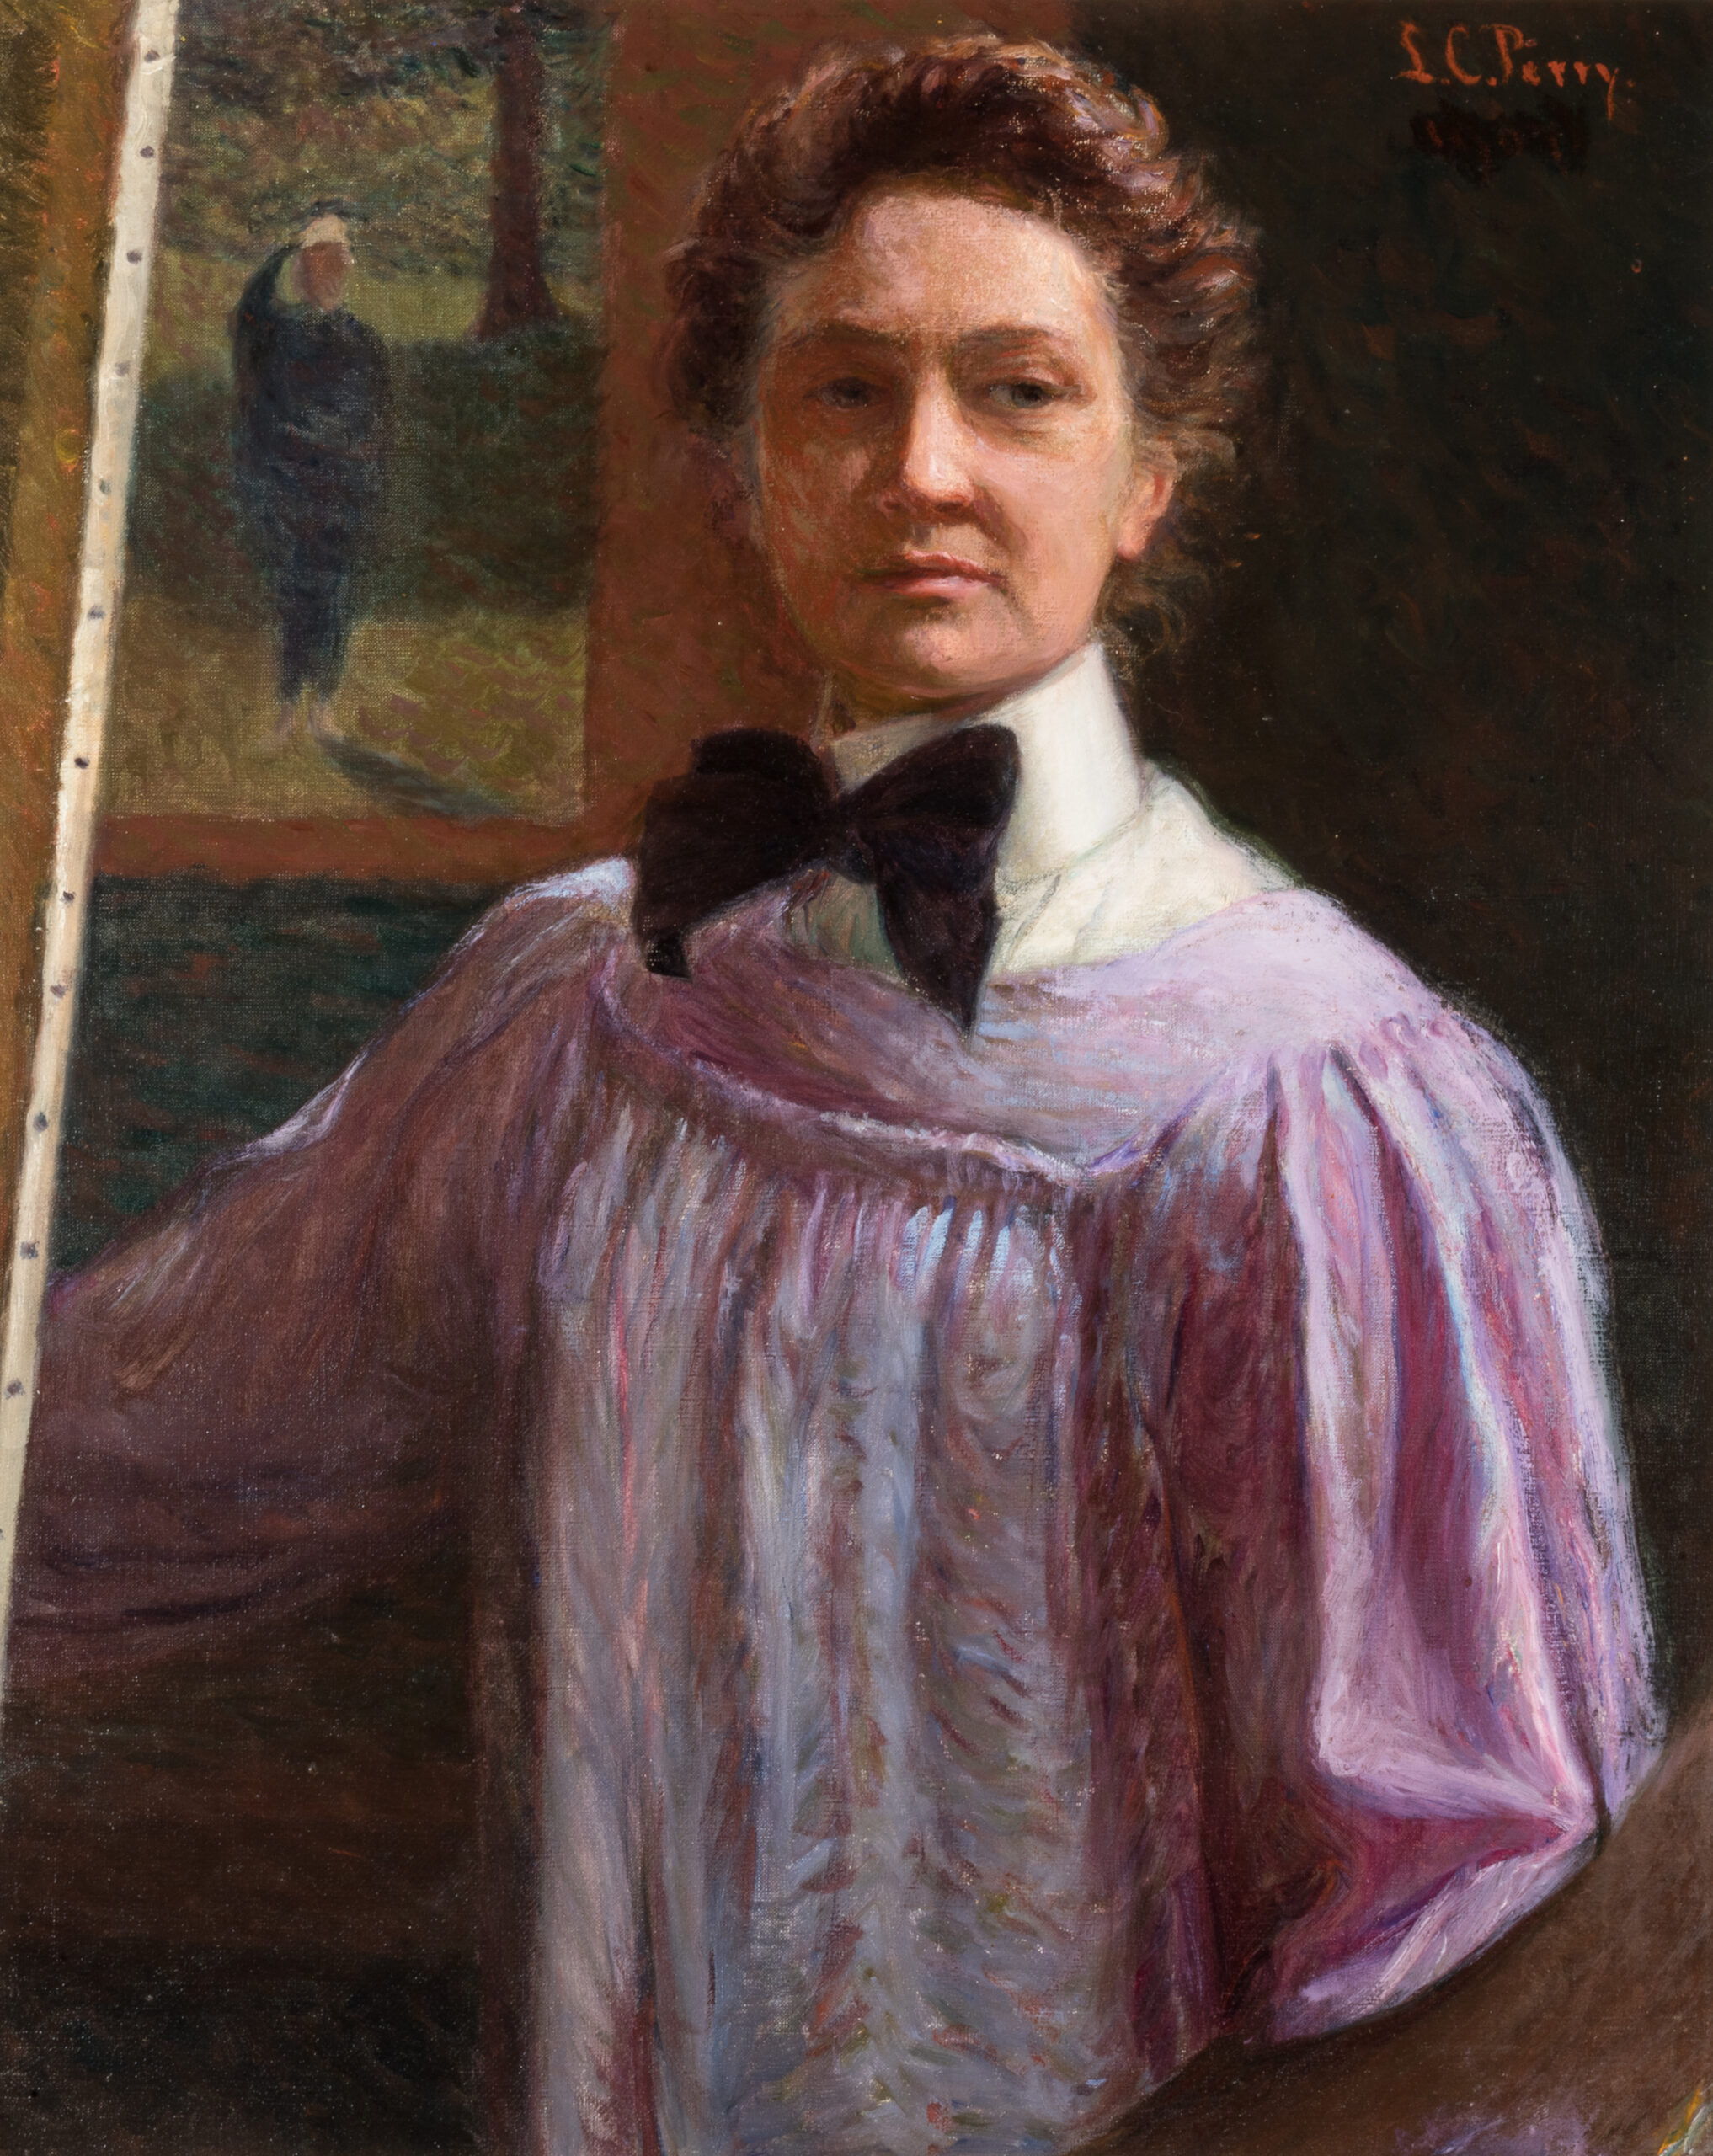 Painting of a white woman wearing a pink shirt with a black tie.